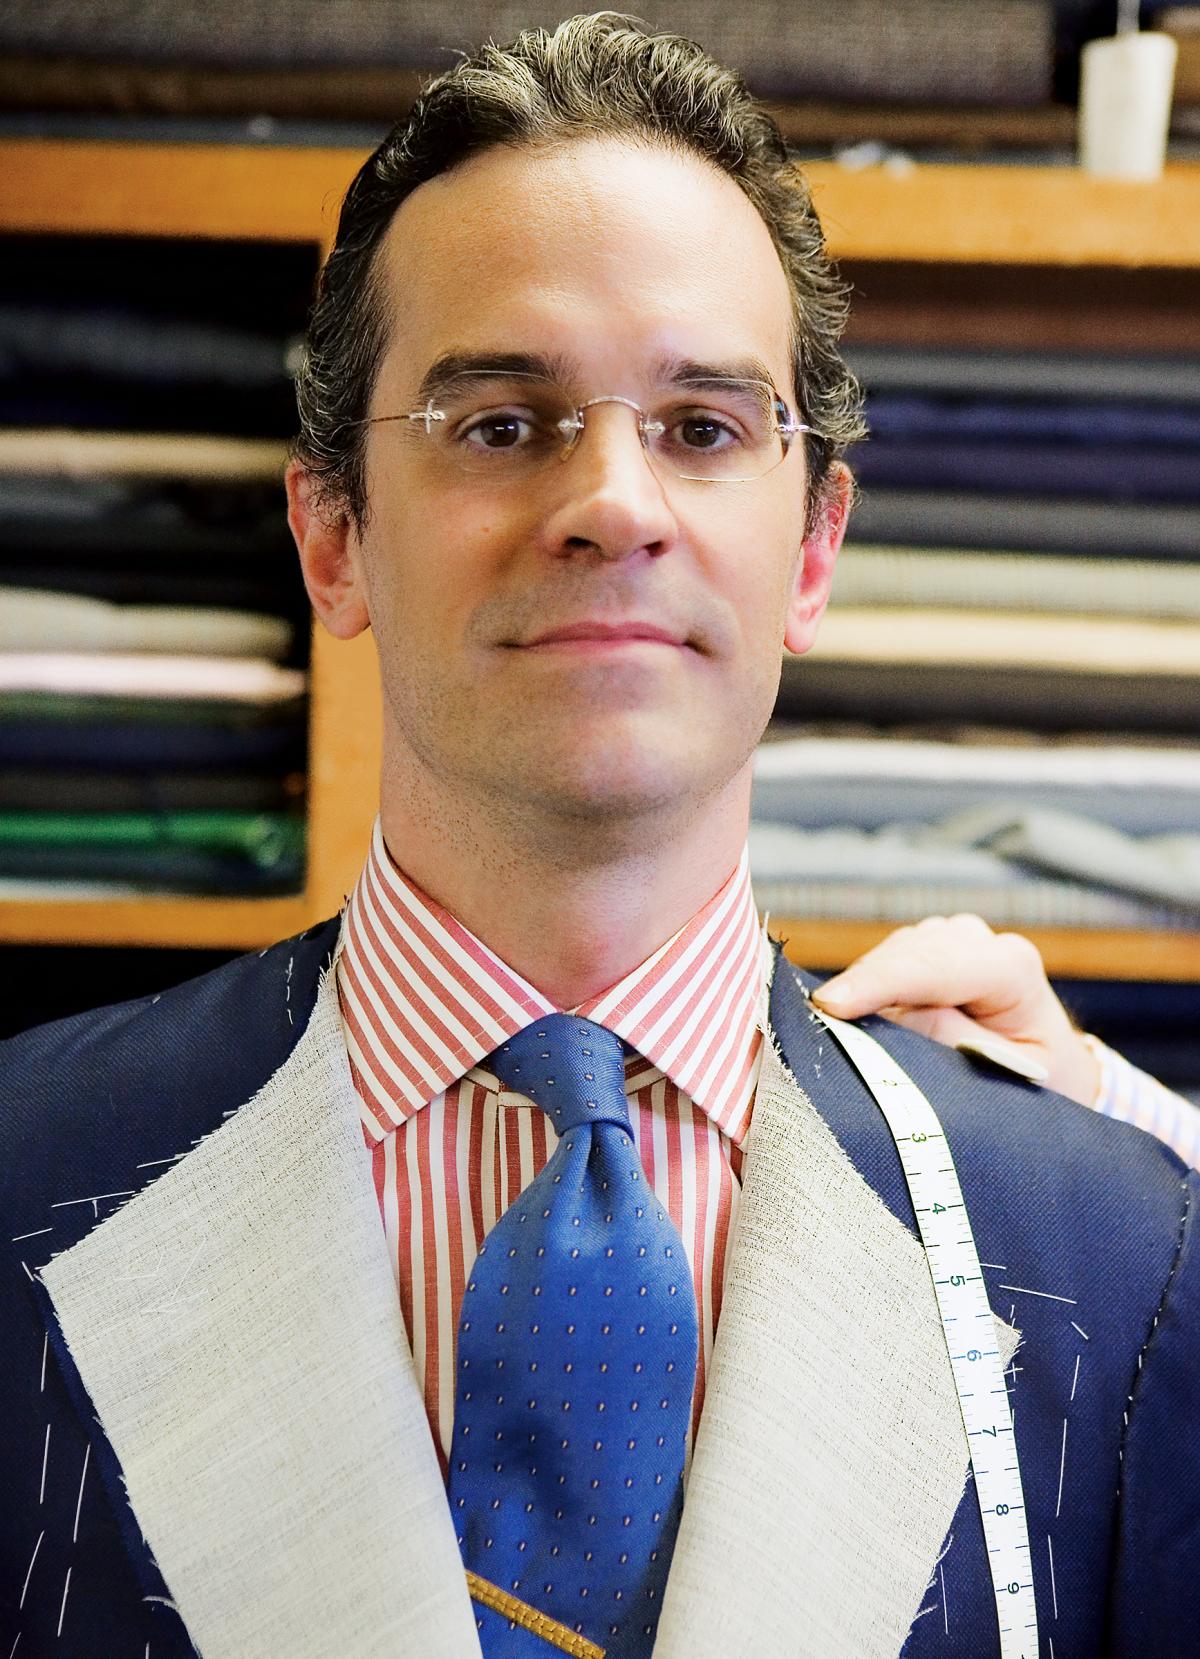 Anton looks directly at the camera while getting measured for a new, navy blue suit, which he wears over a red and white striped shirt and cobalt blue tie